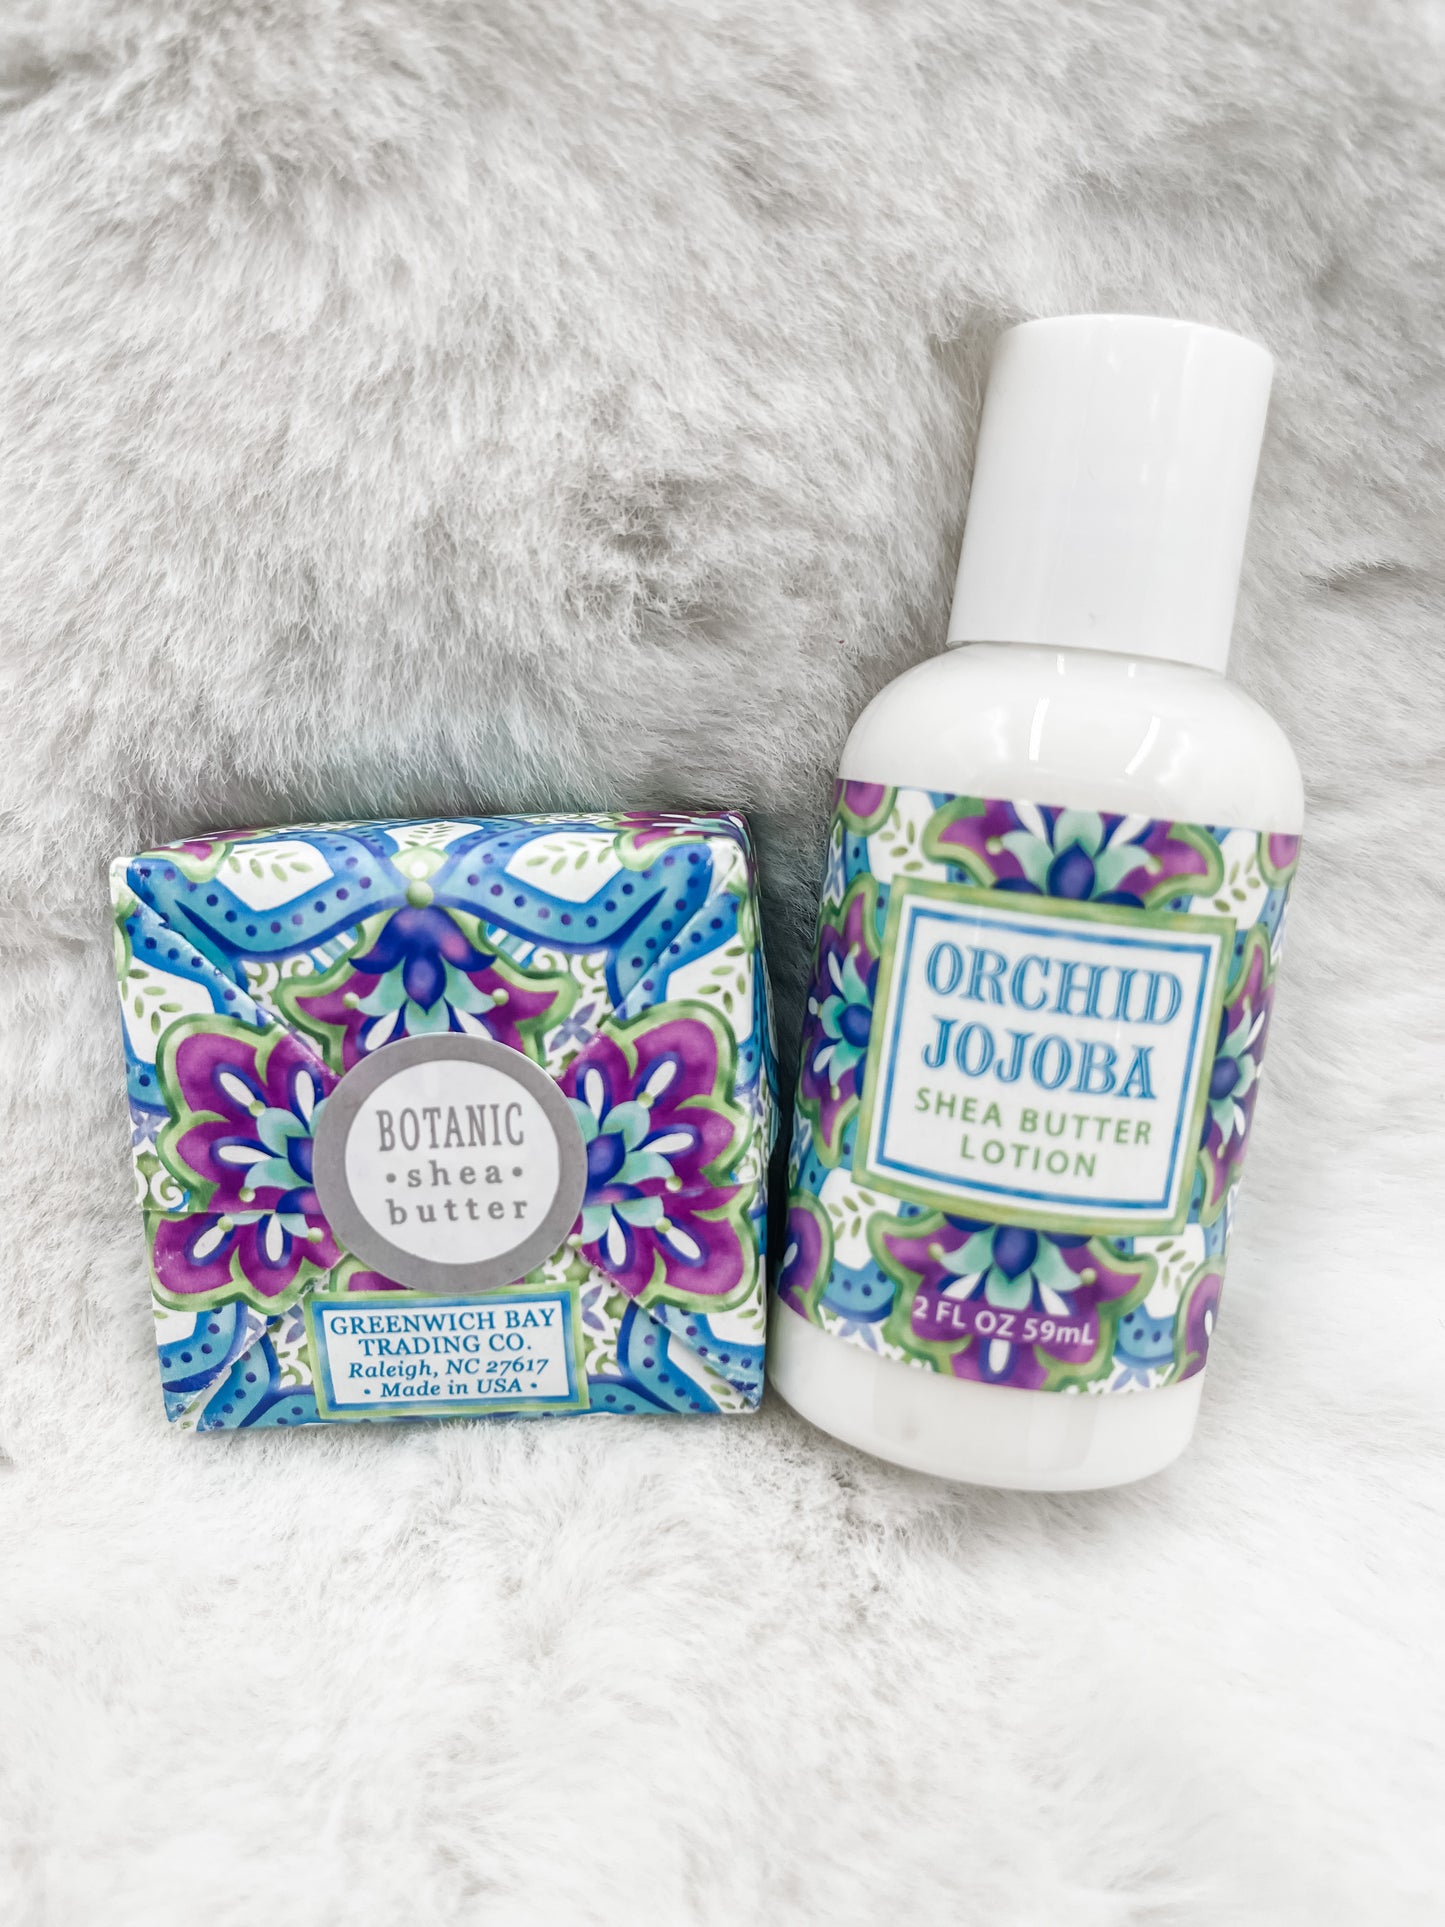 Orchid Jojoba Lotion and Soap Set